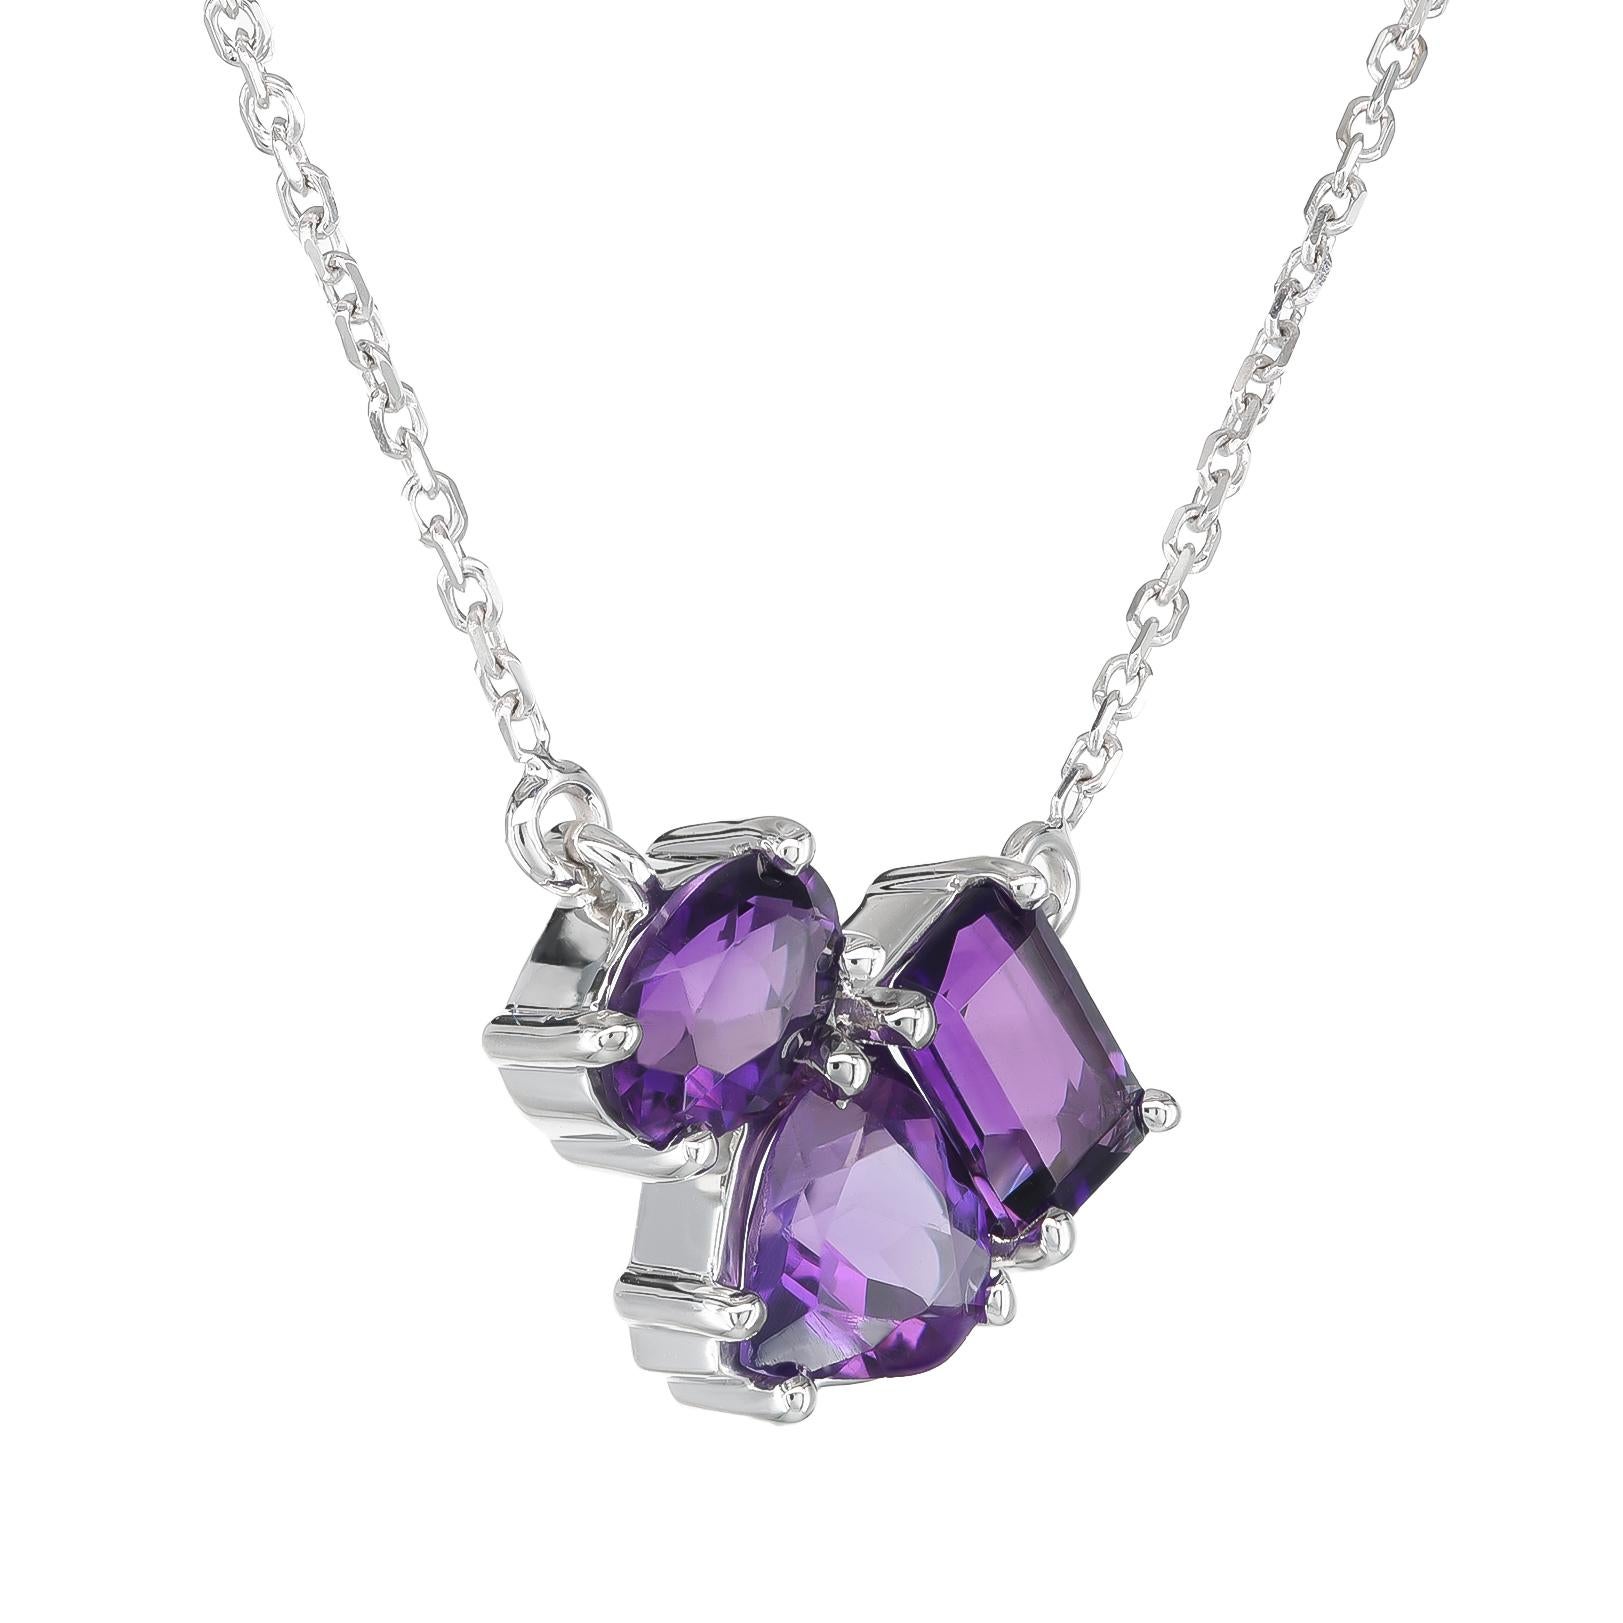 Experience the deep allure of Amethyst, beautifully showcased in a 14K white gold setting. This enchanting gemstone, known for its mesmerizing purple hue, combines the mystique of geology with the artistry of fine jewelry, appealing to those who